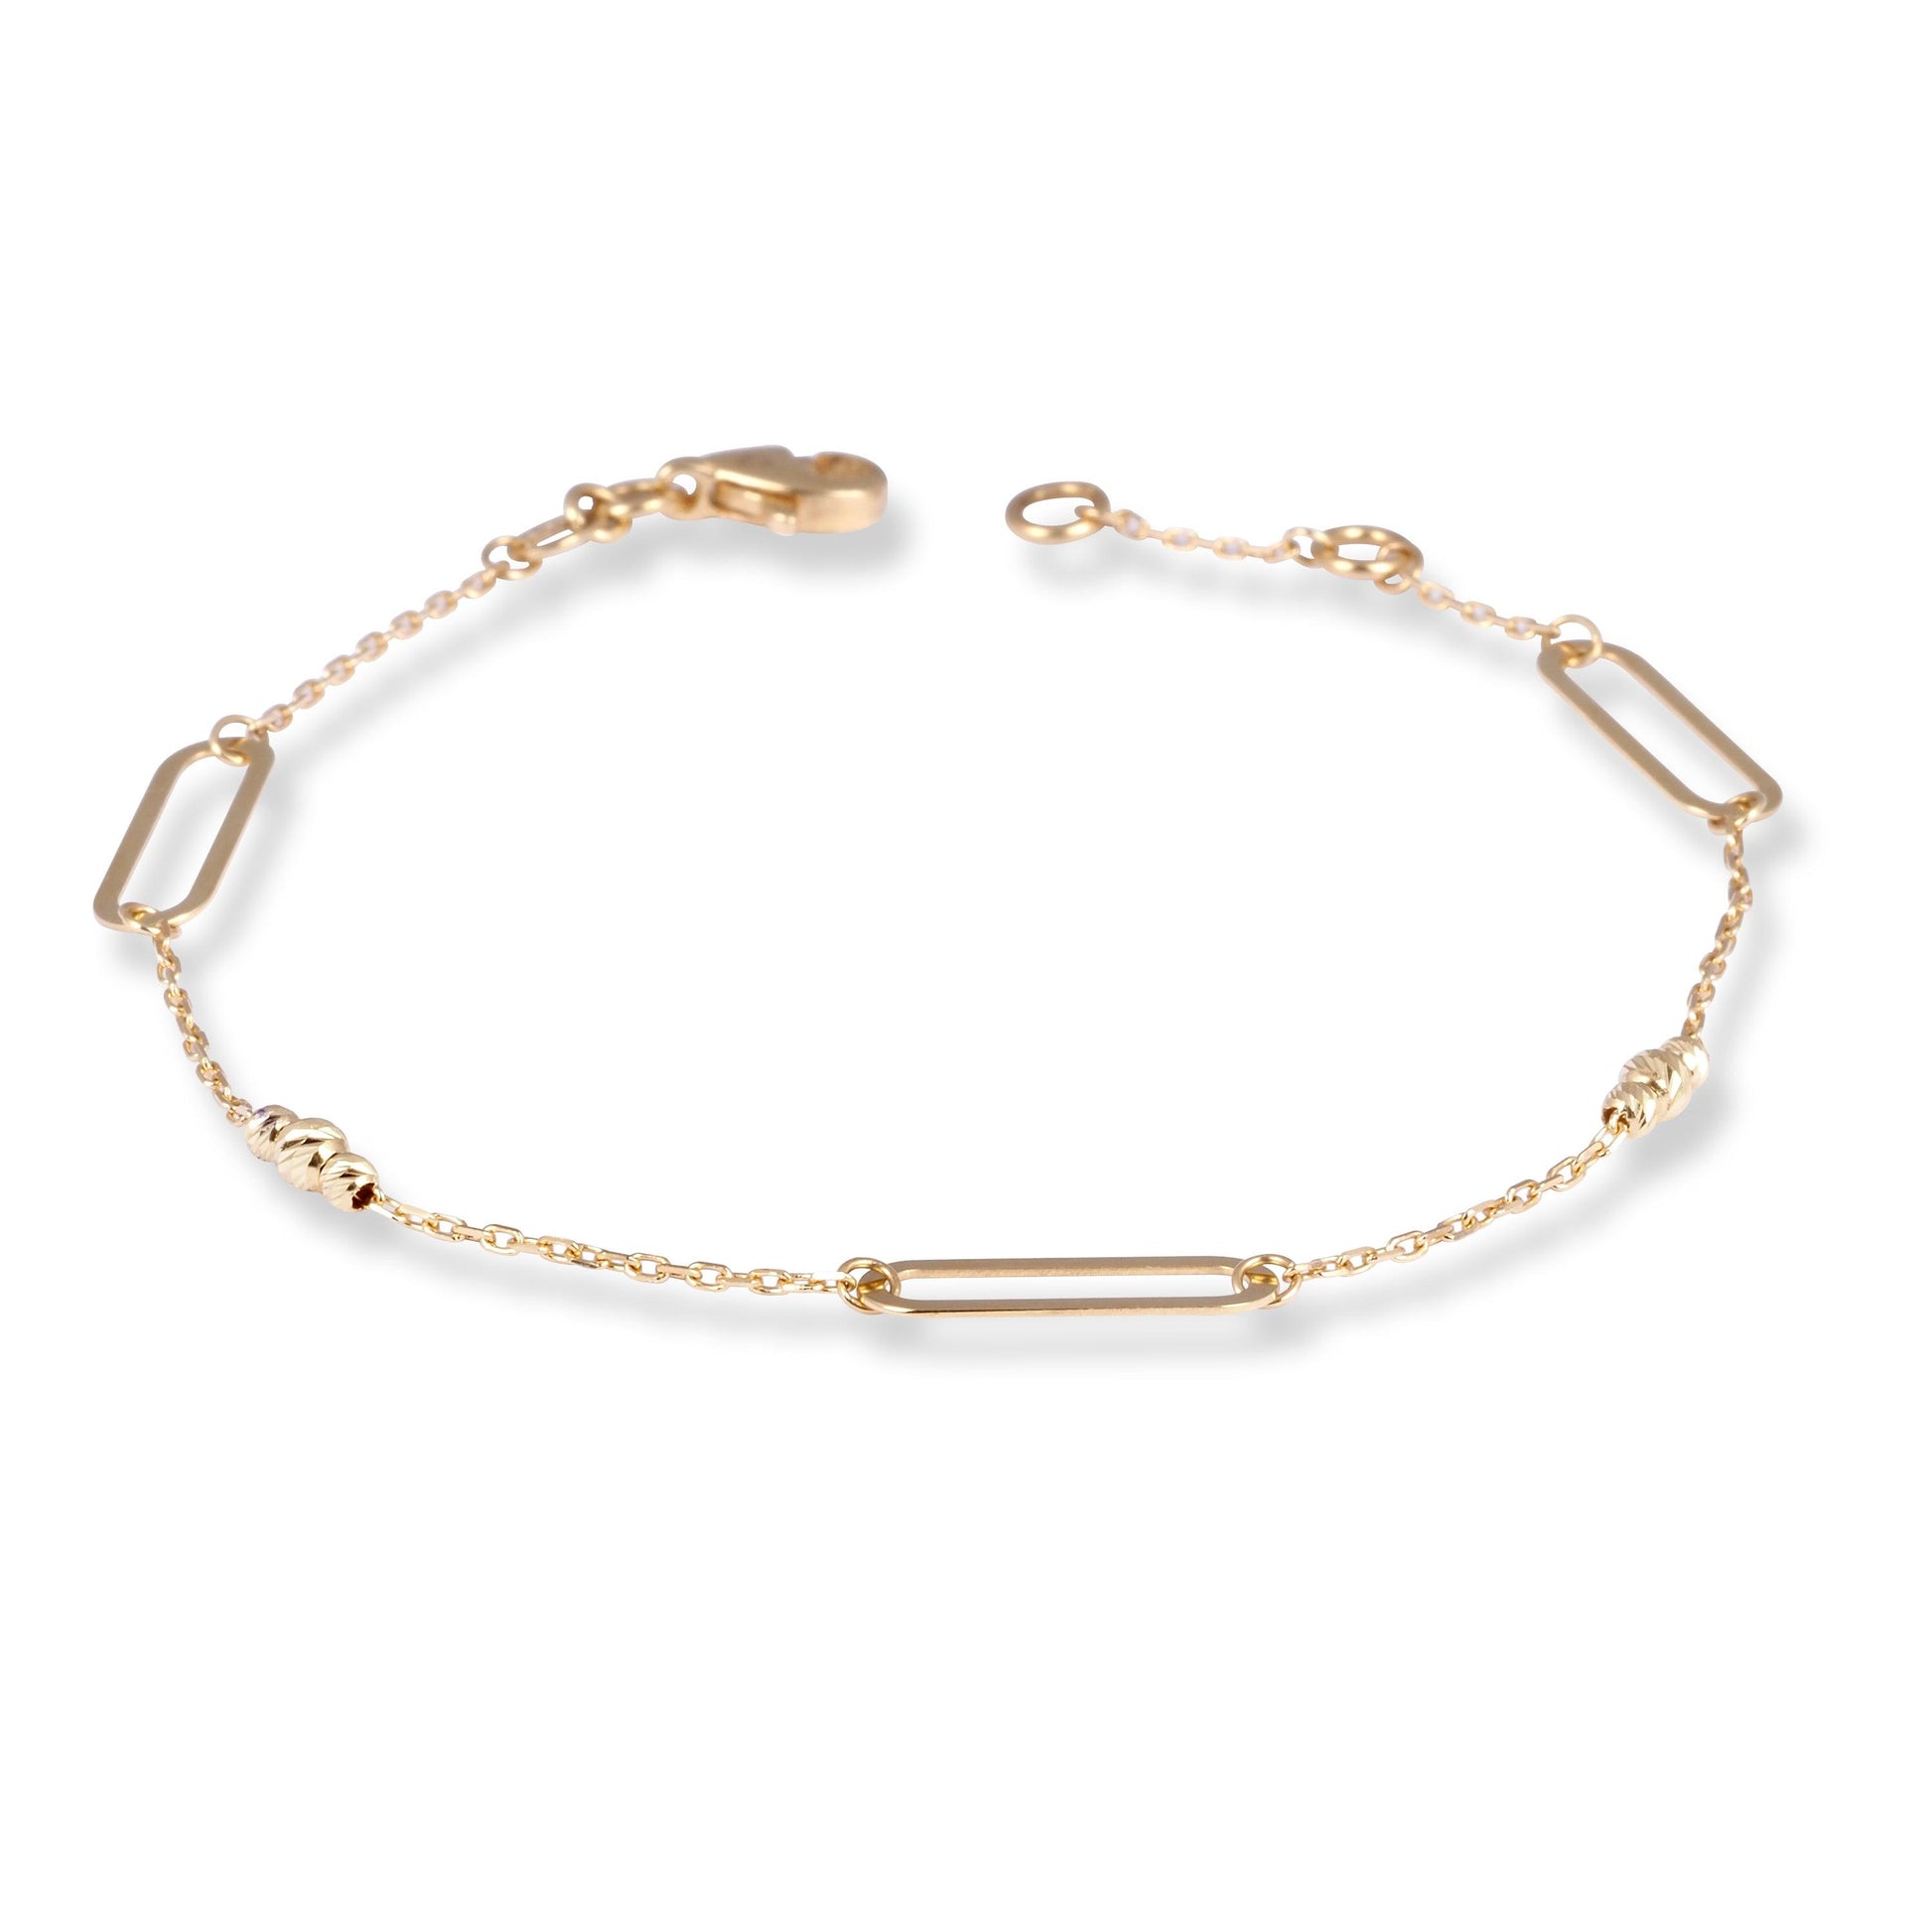 18ct Yellow Gold Bracelet with Links, Beads and Lobster Clasp LBR-8489 - Minar Jewellers